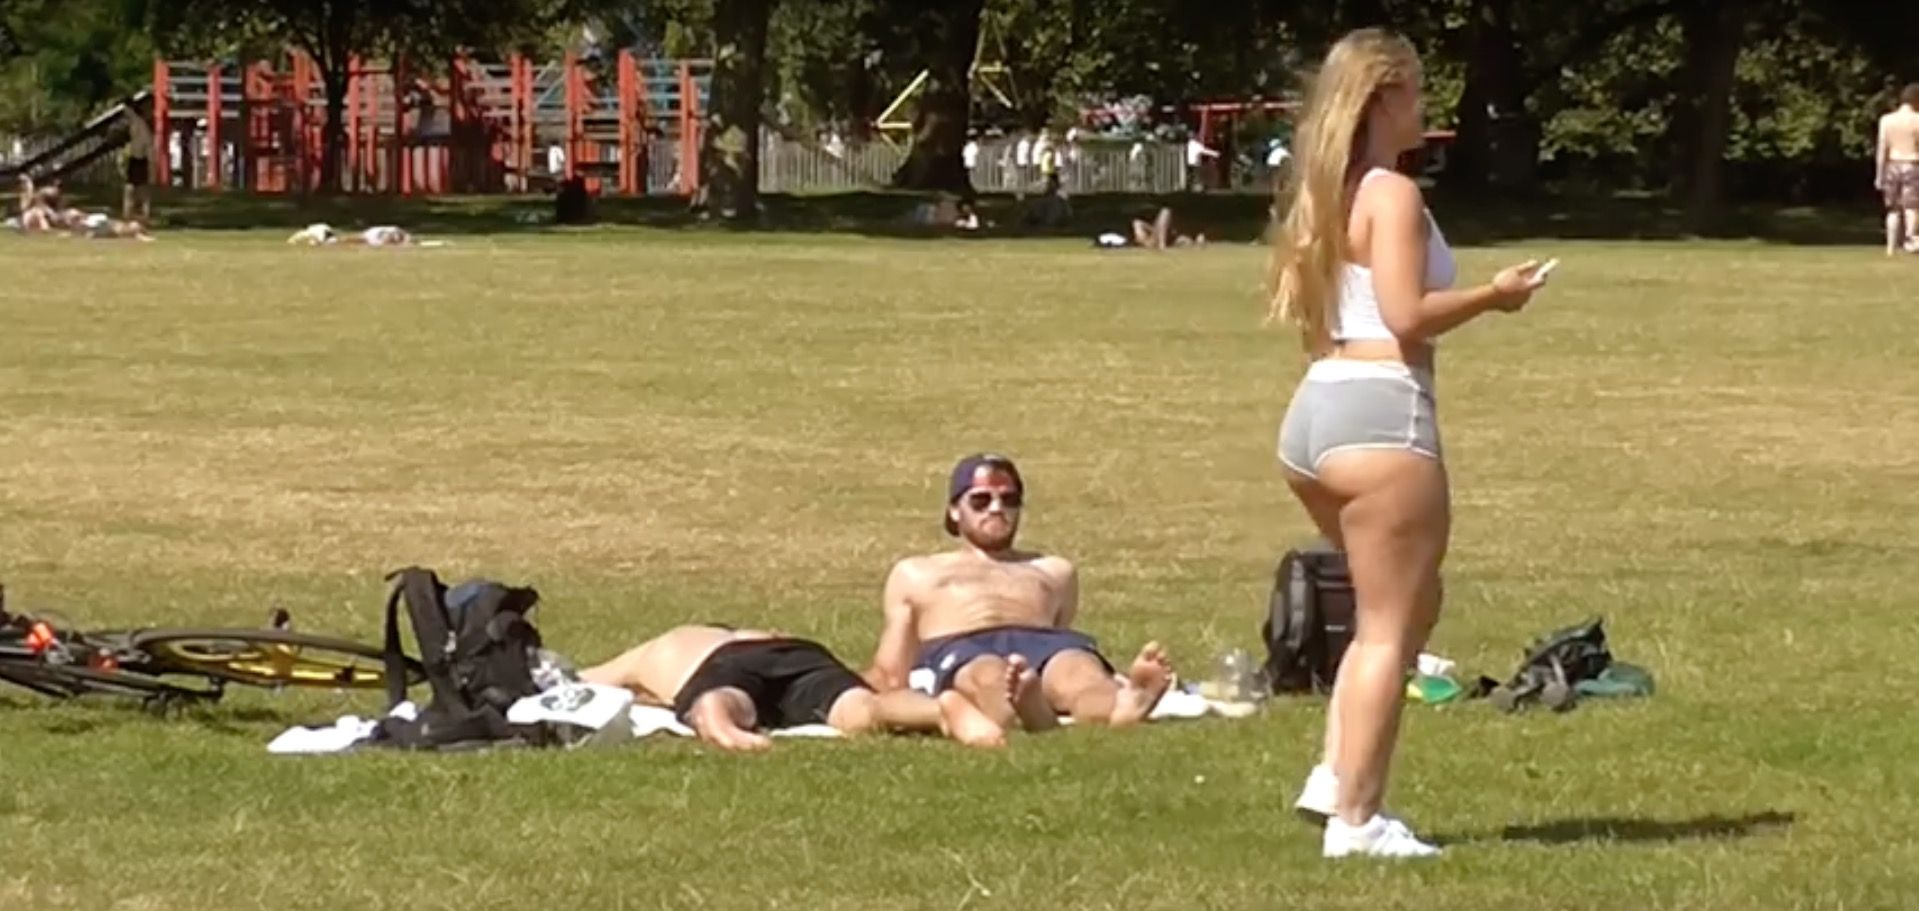 This big booty social experiment shows the grim reality of how objectified women